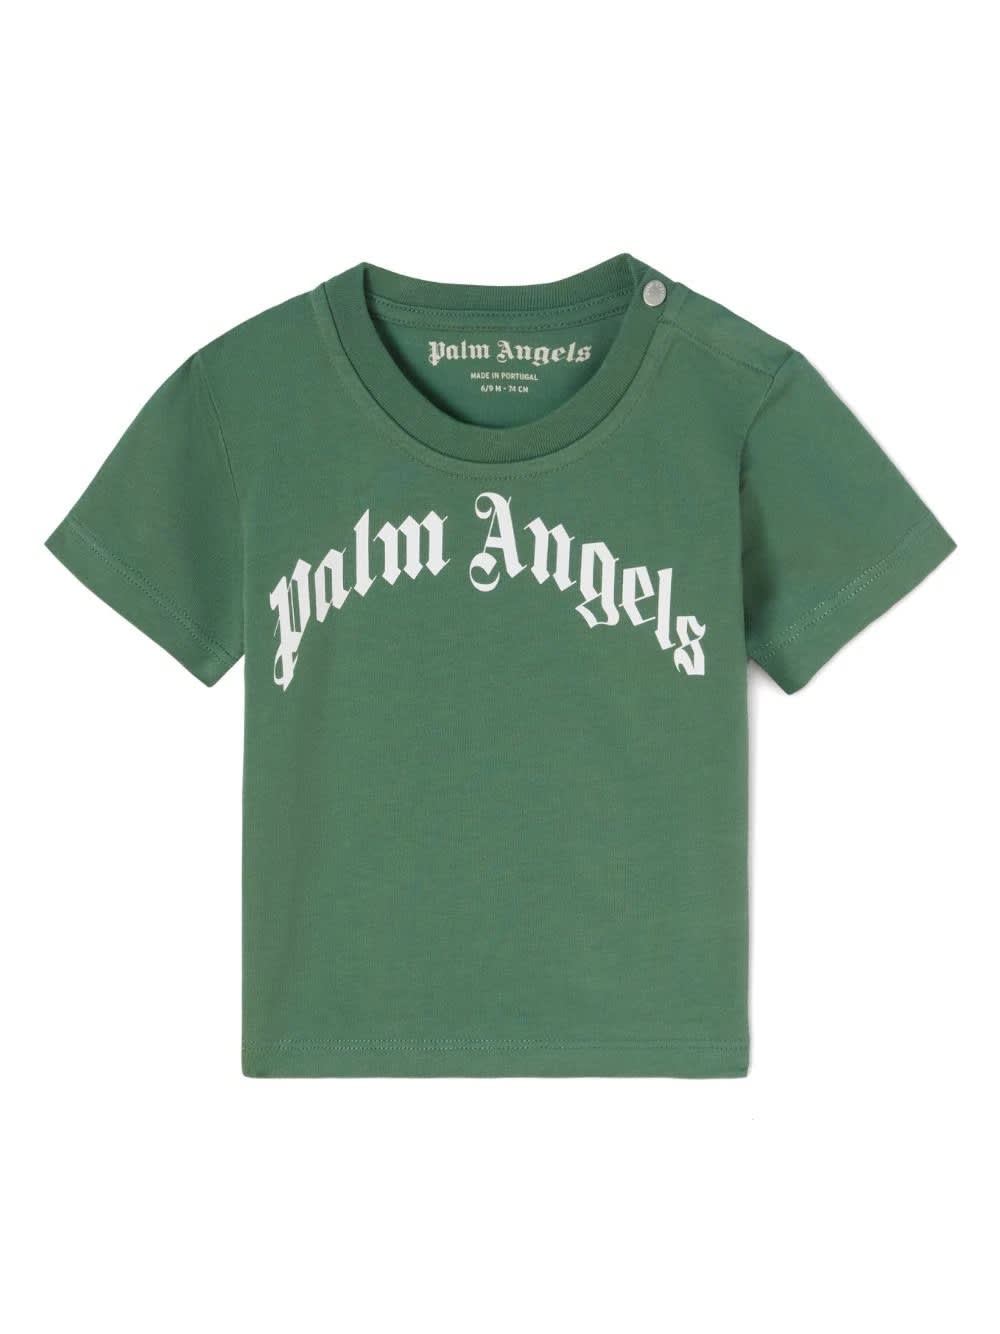 Palm Angels Green T-shirt With Curved Logo